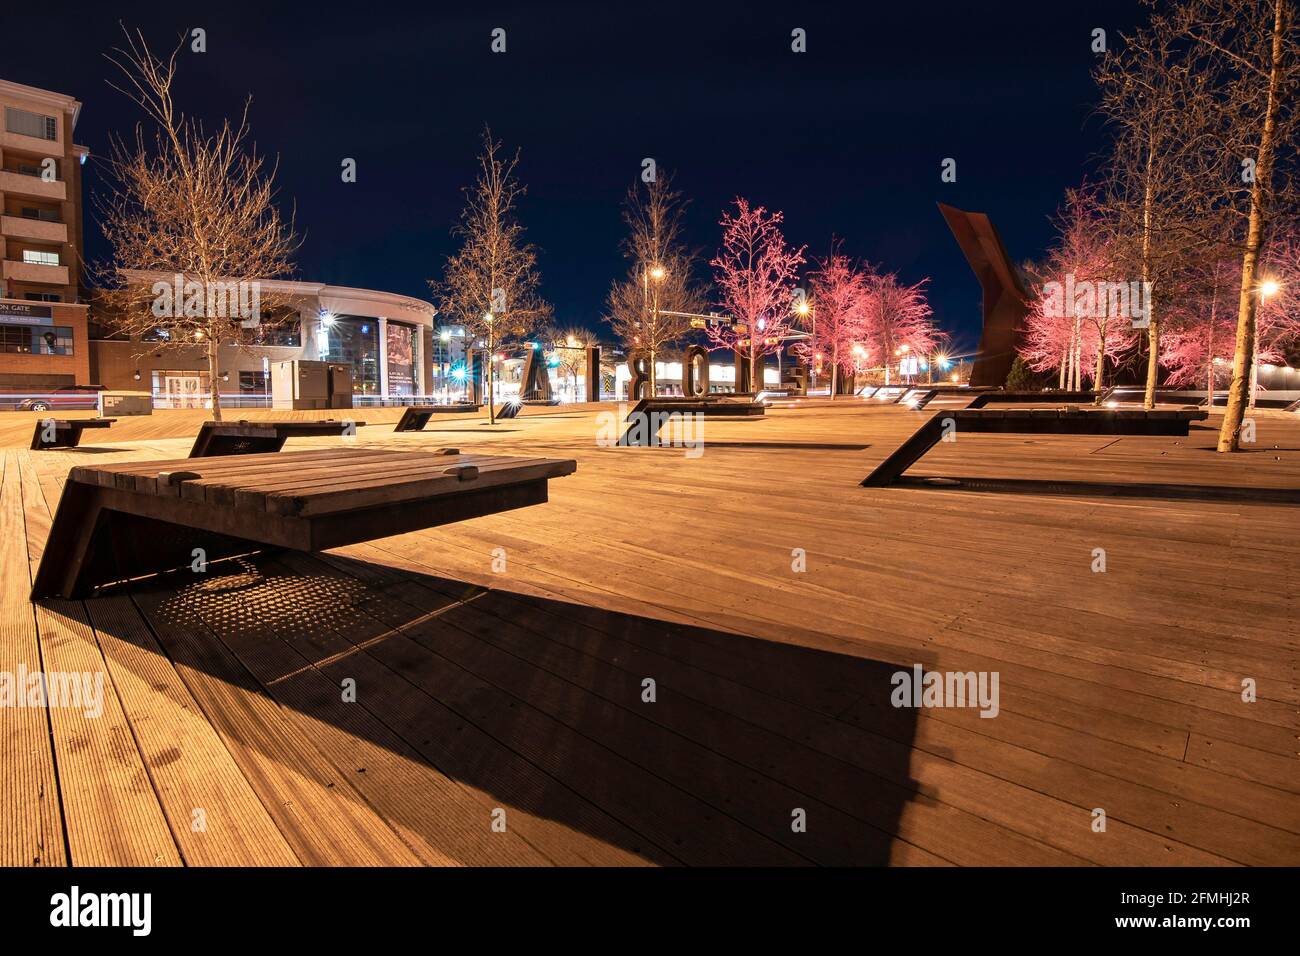 Calgary Alberta Canada, May 01 2021: Modern park benches in a public gathering area along Memorial Drive in a downtown Canadian city at night. Stock Photo